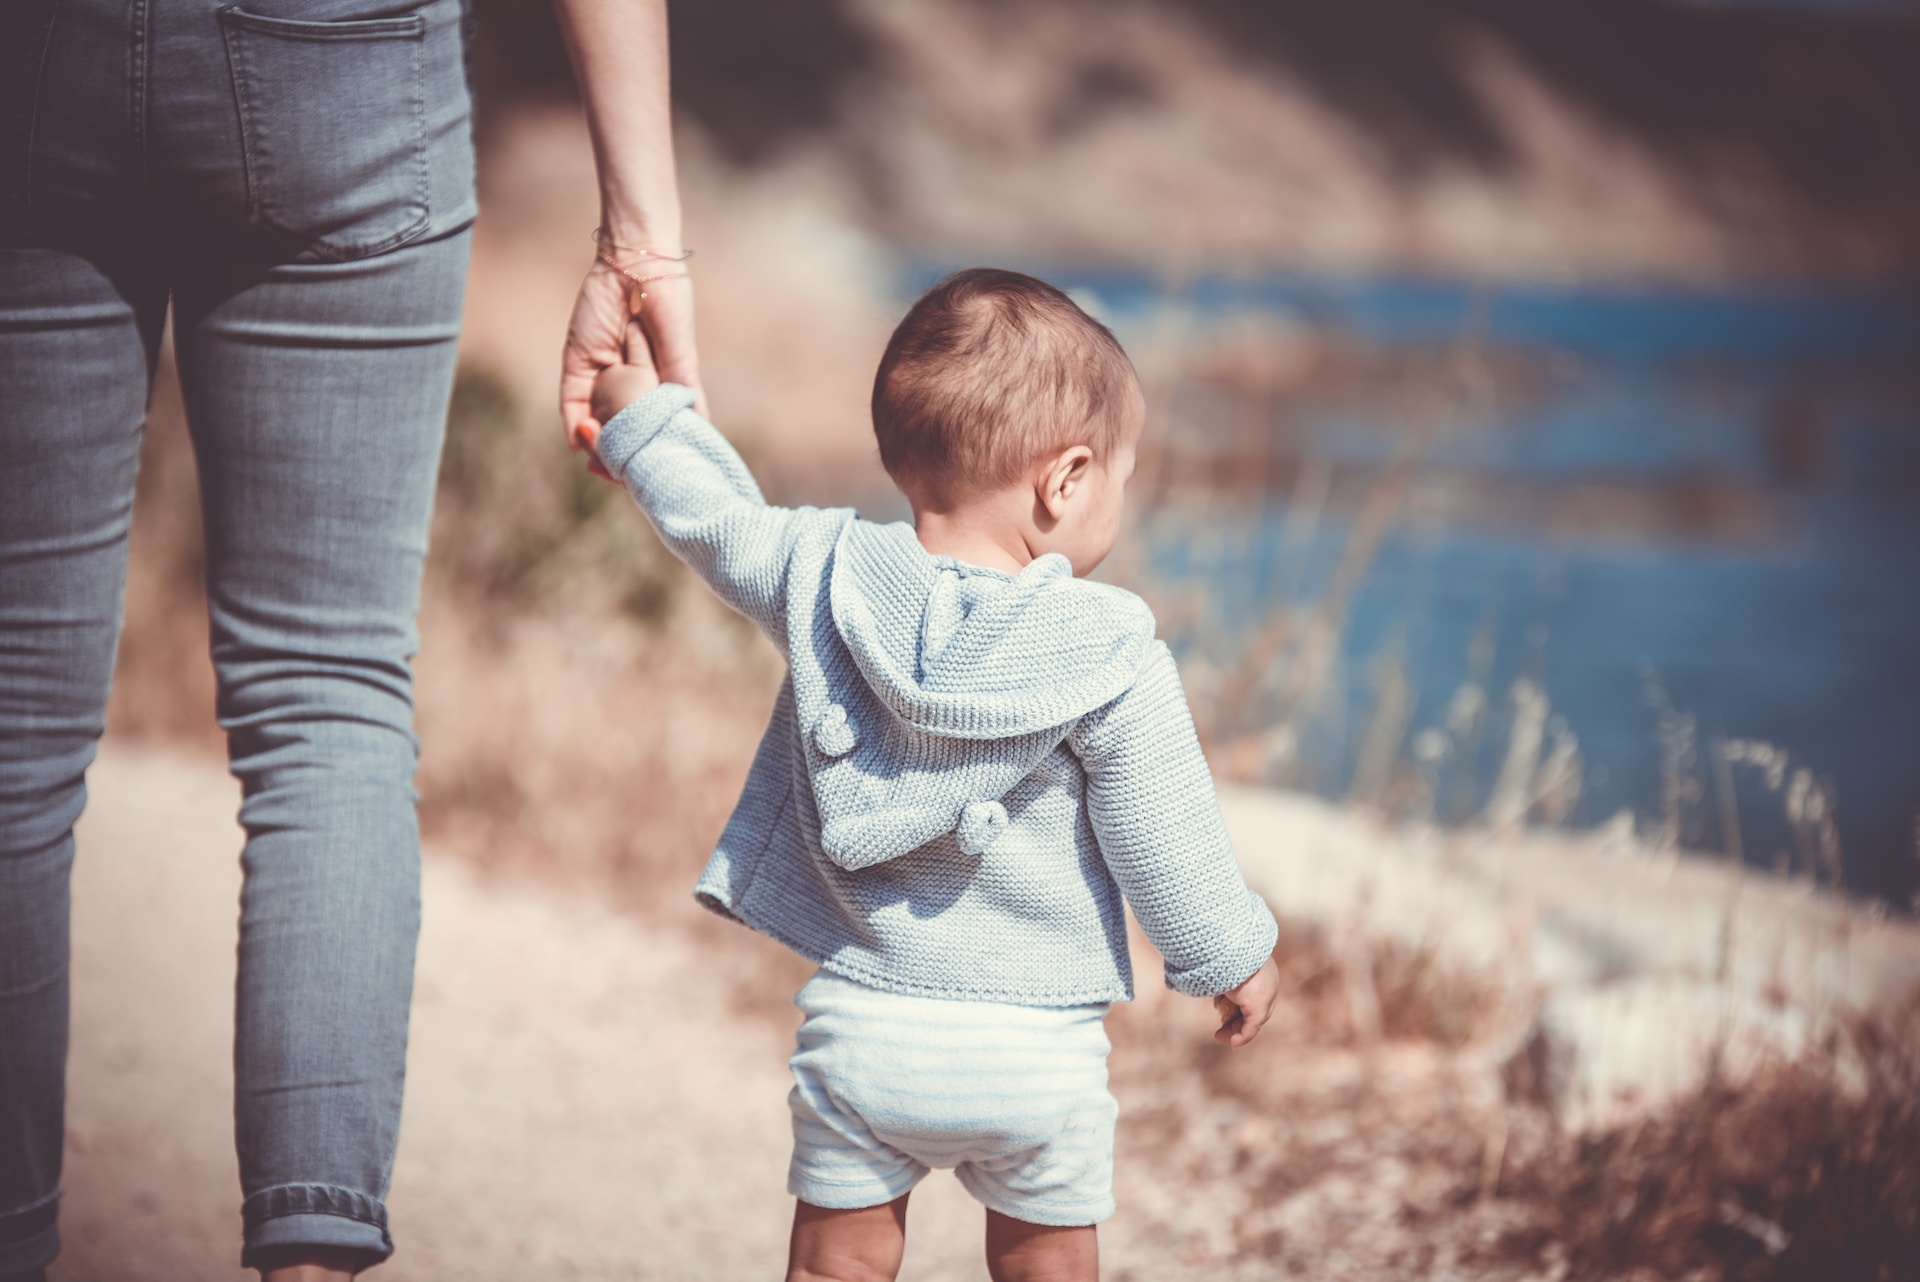 Setting up a trust fund can help secure your child’s financial future and give you more control over when and how their inheritance will be distributed. We explain how to set up a trust in this step-by-step guide.